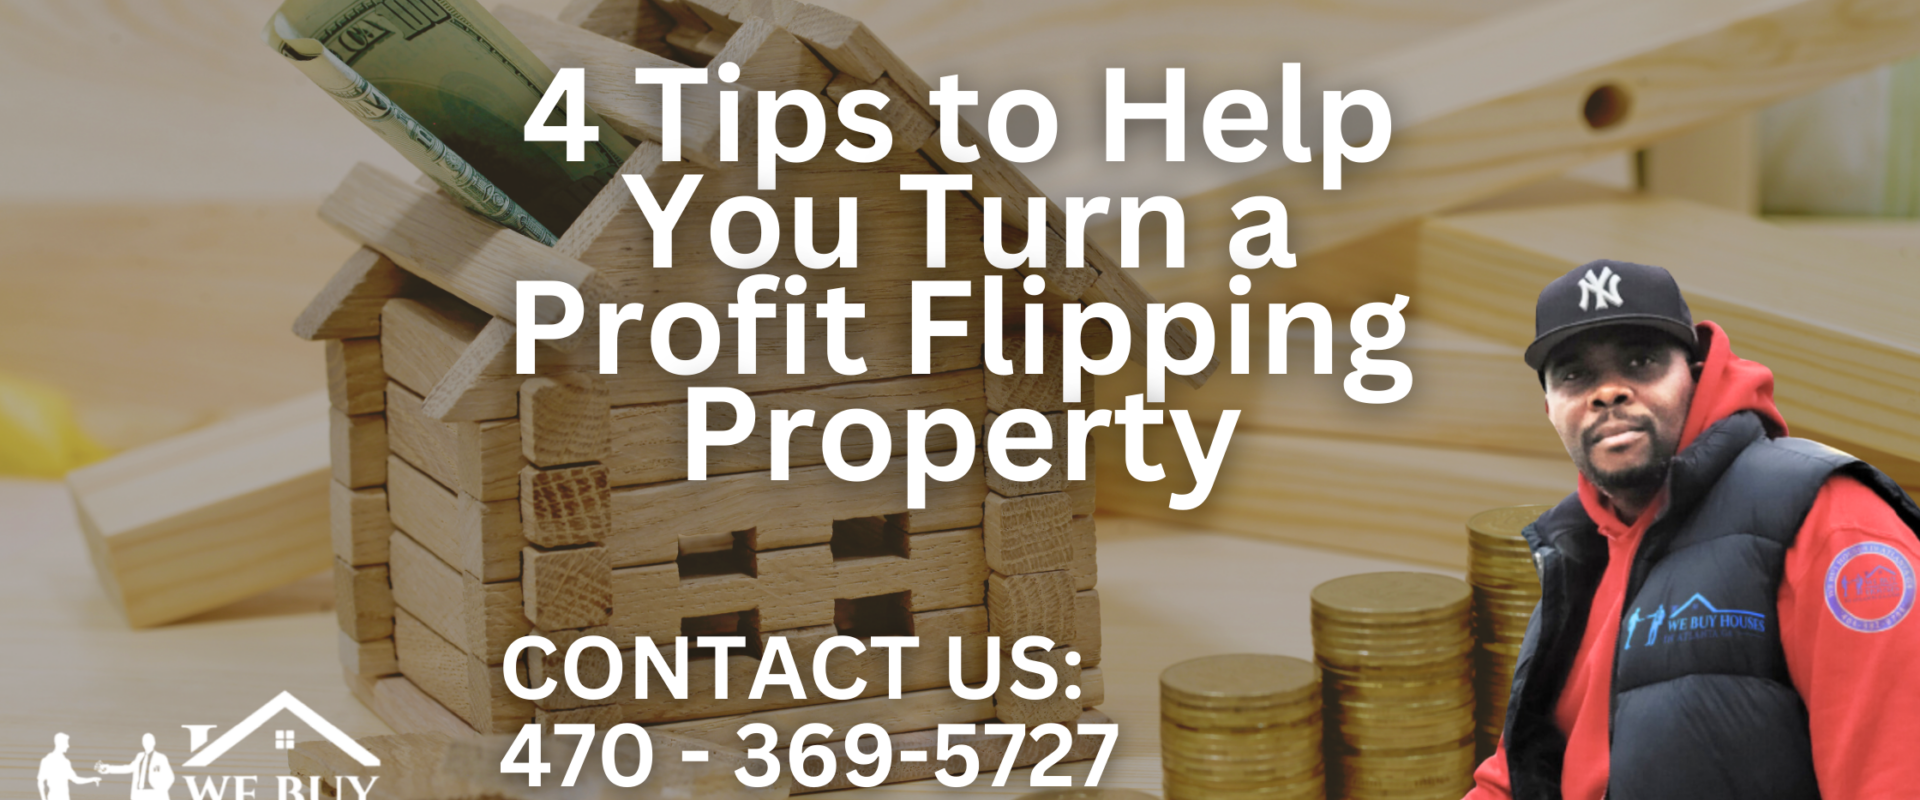 4 Tips to Help You Turn a Profit Flipping Property